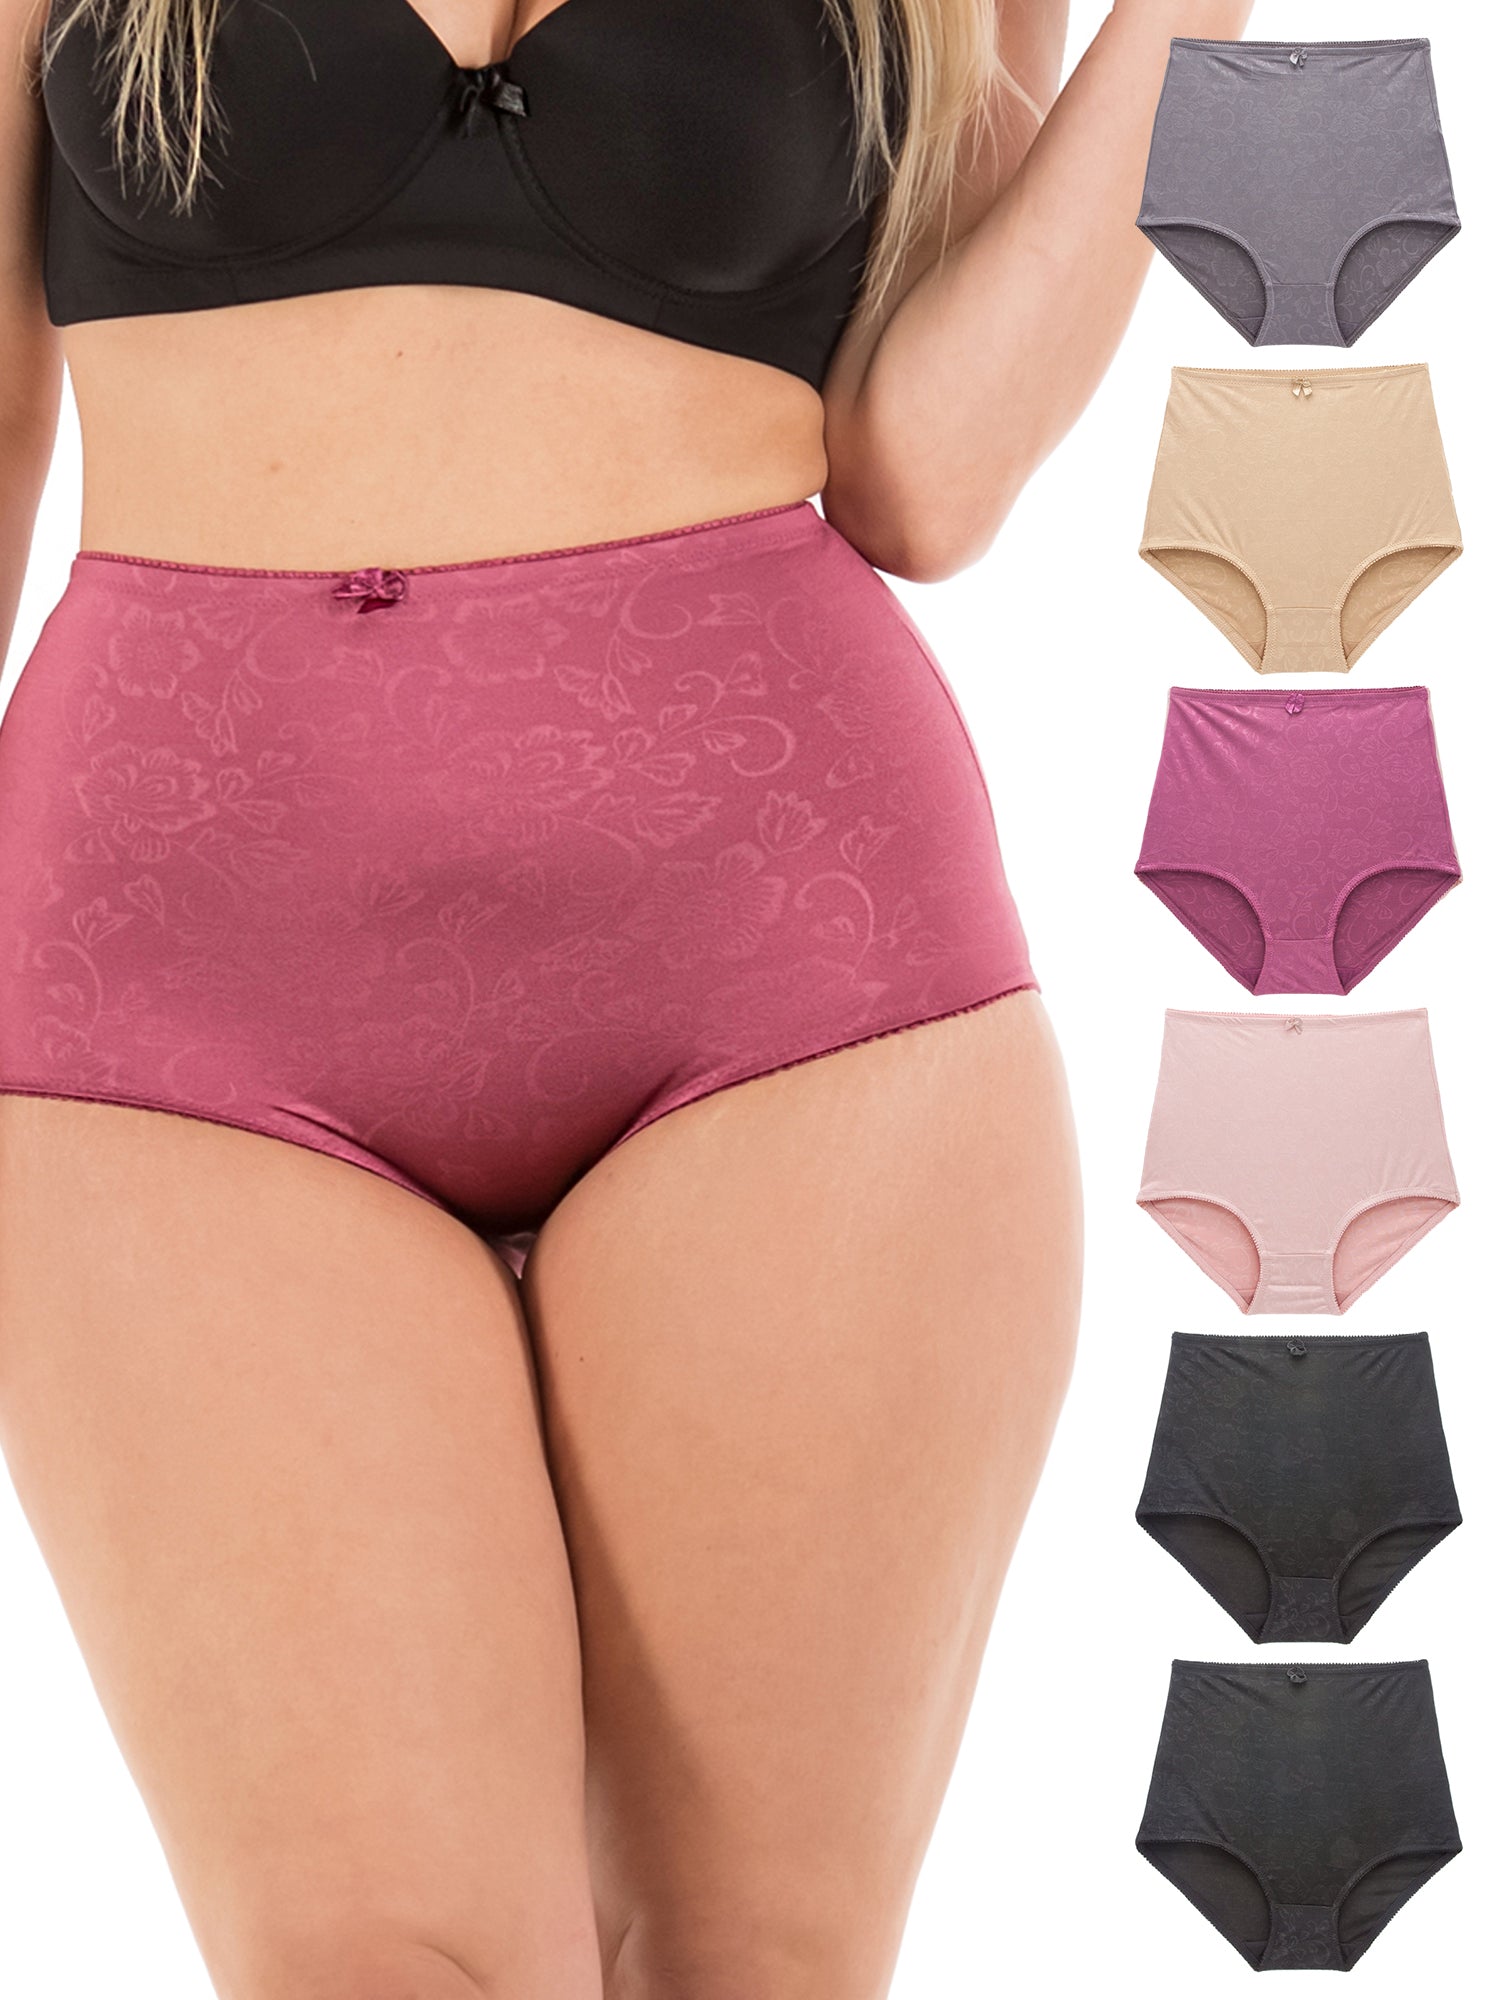 B2BODY Womens Underwear High-Waist Tummy Control Girdle Panties Small to  Plus Size Assorted Colors Multi Pack (Small, Chocolate) at  Women's  Clothing store